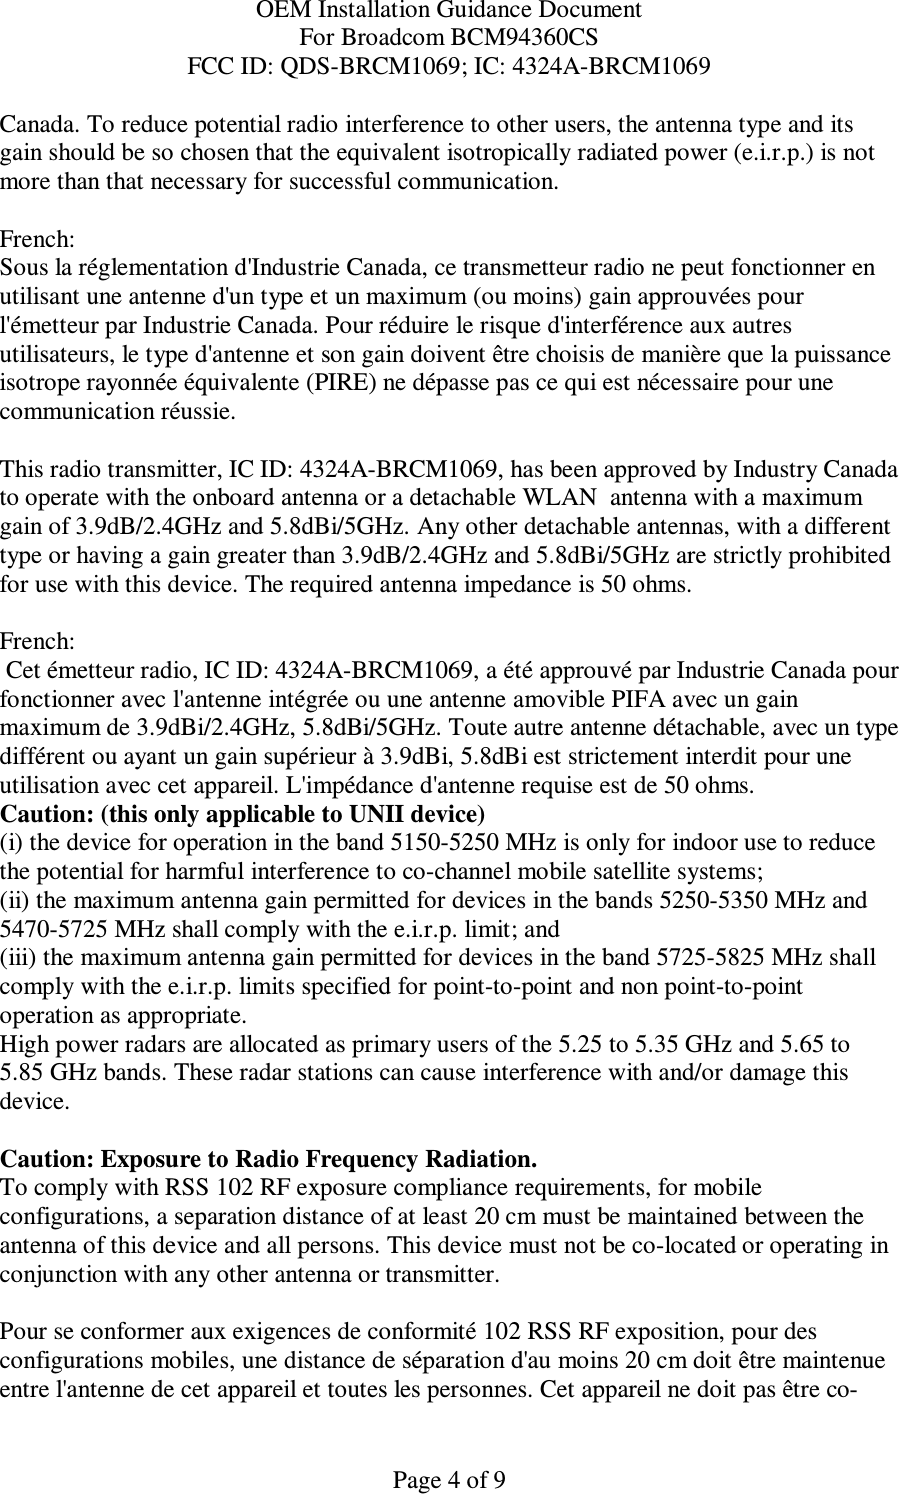 OEM Installation Guidance Document For Broadcom BCM94360CS FCC ID: QDS-BRCM1069; IC: 4324A-BRCM1069  Page 4 of 9 Canada. To reduce potential radio interference to other users, the antenna type and its gain should be so chosen that the equivalent isotropically radiated power (e.i.r.p.) is not more than that necessary for successful communication.  French:  Sous la réglementation d&apos;Industrie Canada, ce transmetteur radio ne peut fonctionner en utilisant une antenne d&apos;un type et un maximum (ou moins) gain approuvées pour l&apos;émetteur par Industrie Canada. Pour réduire le risque d&apos;interférence aux autres utilisateurs, le type d&apos;antenne et son gain doivent être choisis de manière que la puissance isotrope rayonnée équivalente (PIRE) ne dépasse pas ce qui est nécessaire pour une communication réussie.  This radio transmitter, IC ID: 4324A-BRCM1069, has been approved by Industry Canada to operate with the onboard antenna or a detachable WLAN  antenna with a maximum gain of 3.9dB/2.4GHz and 5.8dBi/5GHz. Any other detachable antennas, with a different type or having a gain greater than 3.9dB/2.4GHz and 5.8dBi/5GHz are strictly prohibited for use with this device. The required antenna impedance is 50 ohms.  French:   Cet émetteur radio, IC ID: 4324A-BRCM1069, a été approuvé par Industrie Canada pour fonctionner avec l&apos;antenne intégrée ou une antenne amovible PIFA avec un gain maximum de 3.9dBi/2.4GHz, 5.8dBi/5GHz. Toute autre antenne détachable, avec un type différent ou ayant un gain supérieur à 3.9dBi, 5.8dBi est strictement interdit pour une utilisation avec cet appareil. L&apos;impédance d&apos;antenne requise est de 50 ohms. Caution: (this only applicable to UNII device) (i) the device for operation in the band 5150-5250 MHz is only for indoor use to reduce the potential for harmful interference to co-channel mobile satellite systems; (ii) the maximum antenna gain permitted for devices in the bands 5250-5350 MHz and 5470-5725 MHz shall comply with the e.i.r.p. limit; and (iii) the maximum antenna gain permitted for devices in the band 5725-5825 MHz shall comply with the e.i.r.p. limits specified for point-to-point and non point-to-point operation as appropriate. High power radars are allocated as primary users of the 5.25 to 5.35 GHz and 5.65 to 5.85 GHz bands. These radar stations can cause interference with and/or damage this device.  Caution: Exposure to Radio Frequency Radiation. To comply with RSS 102 RF exposure compliance requirements, for mobile configurations, a separation distance of at least 20 cm must be maintained between the antenna of this device and all persons. This device must not be co-located or operating in conjunction with any other antenna or transmitter.  Pour se conformer aux exigences de conformité 102 RSS RF exposition, pour des configurations mobiles, une distance de séparation d&apos;au moins 20 cm doit être maintenue entre l&apos;antenne de cet appareil et toutes les personnes. Cet appareil ne doit pas être co-